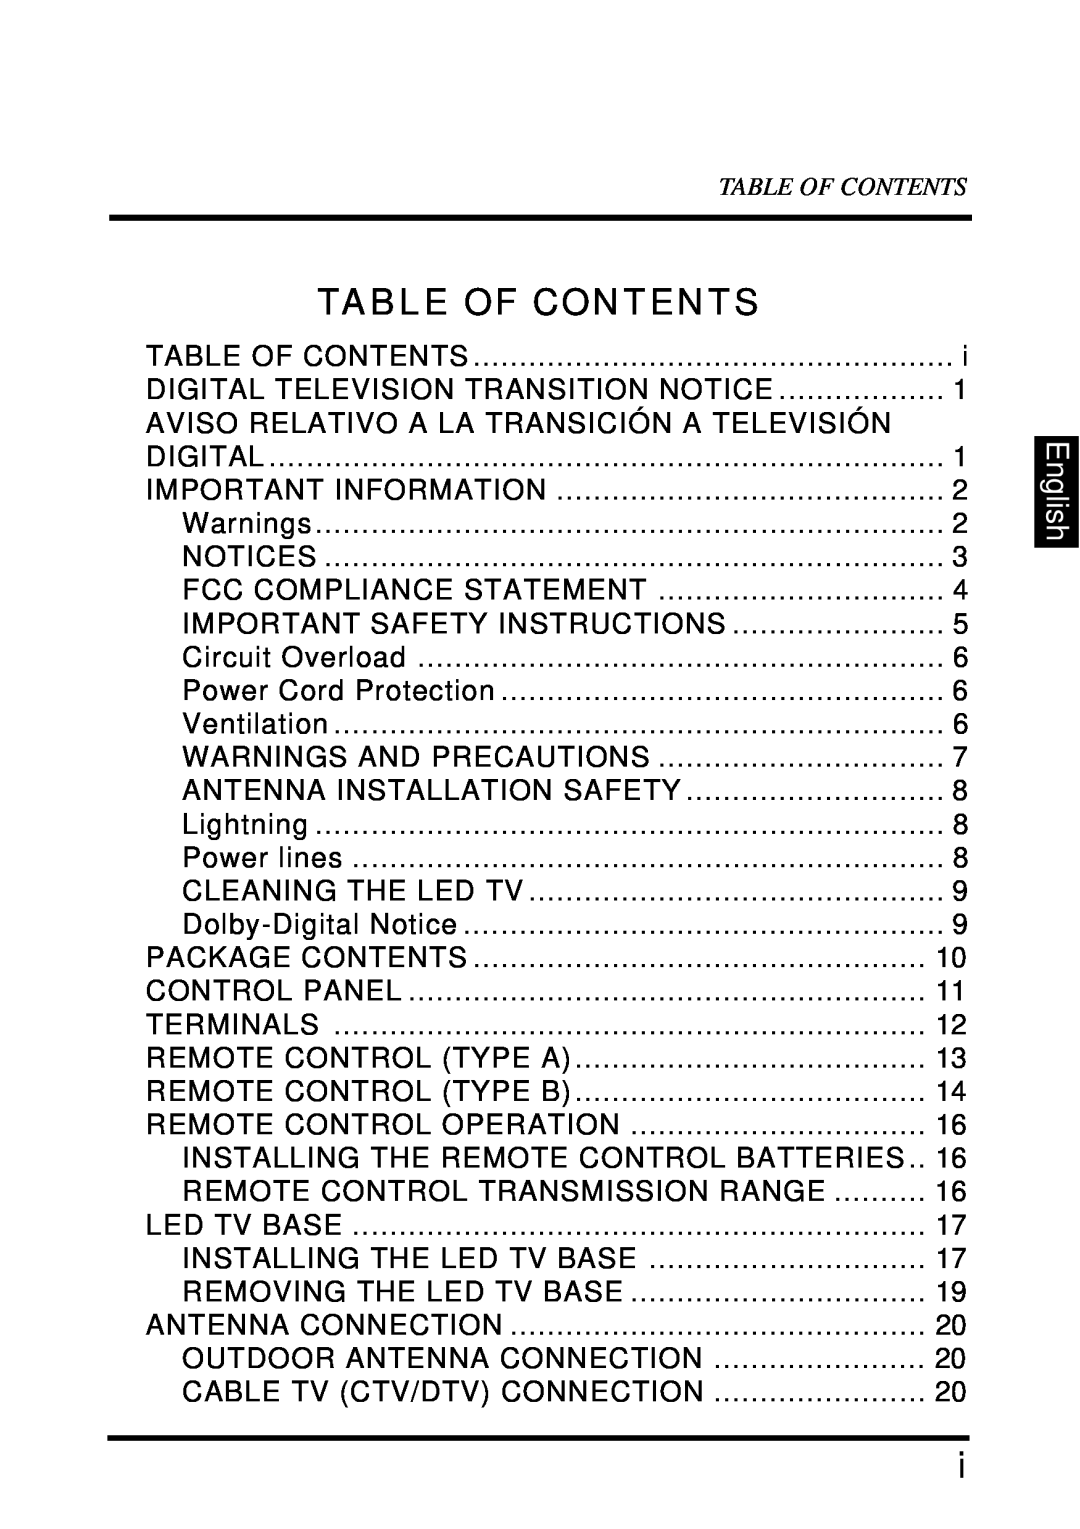 Westinghouse LD-4680 user manual Table Of Contents, English 